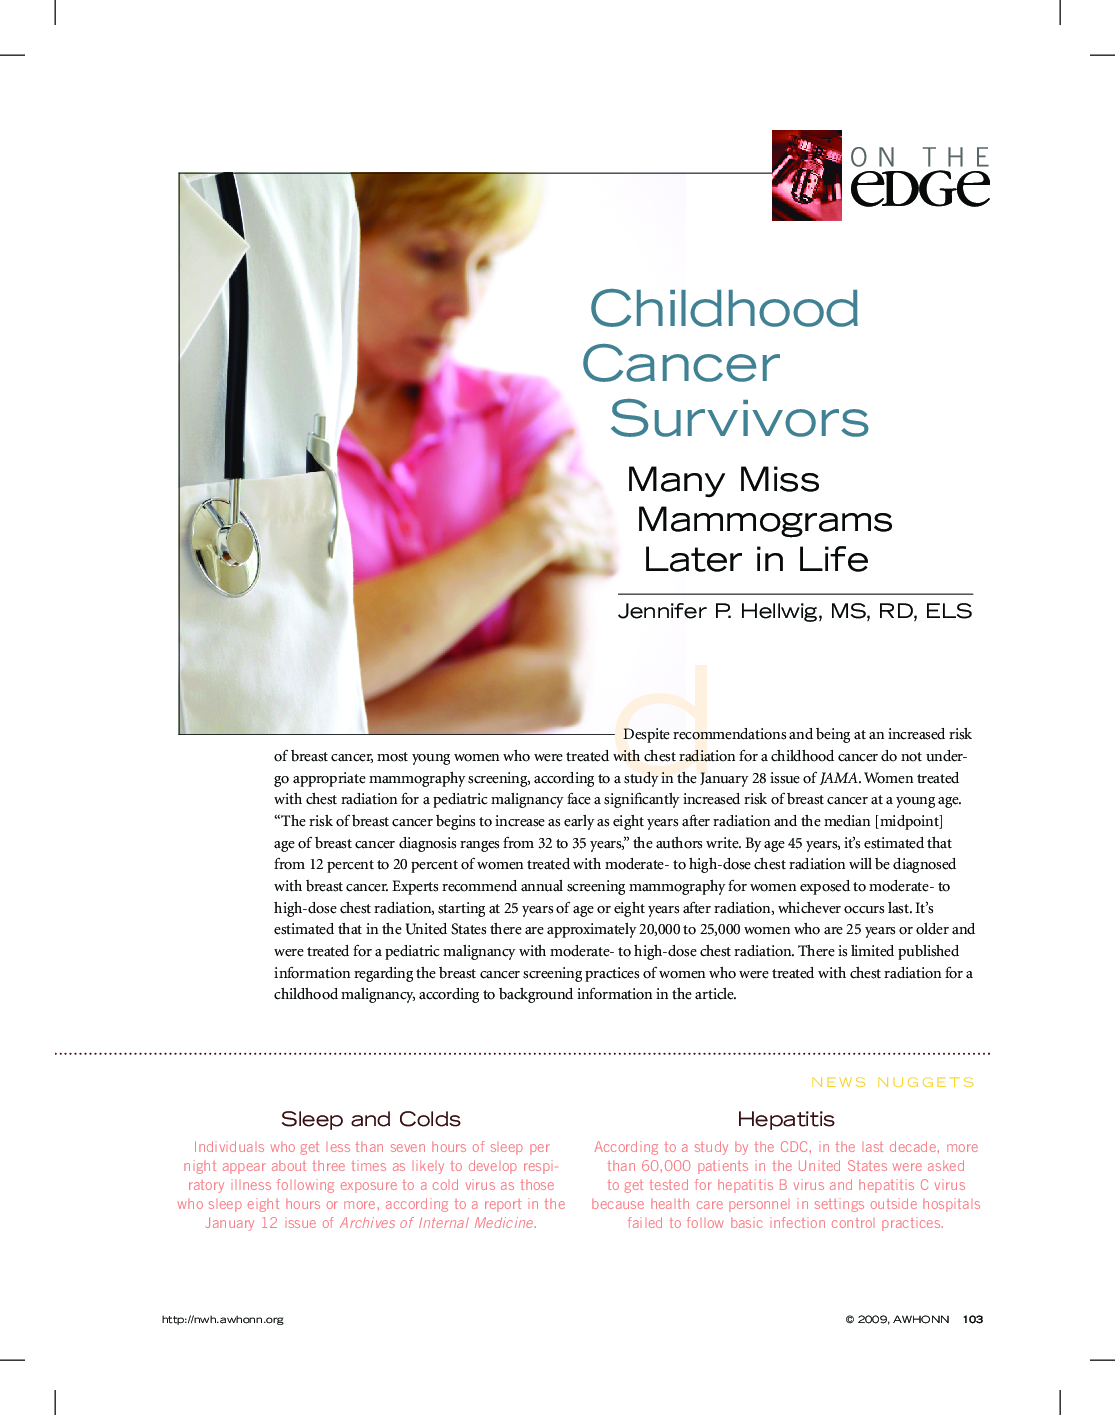 Childhood Cancer Survivors: Many Miss Mammograms Later in Life